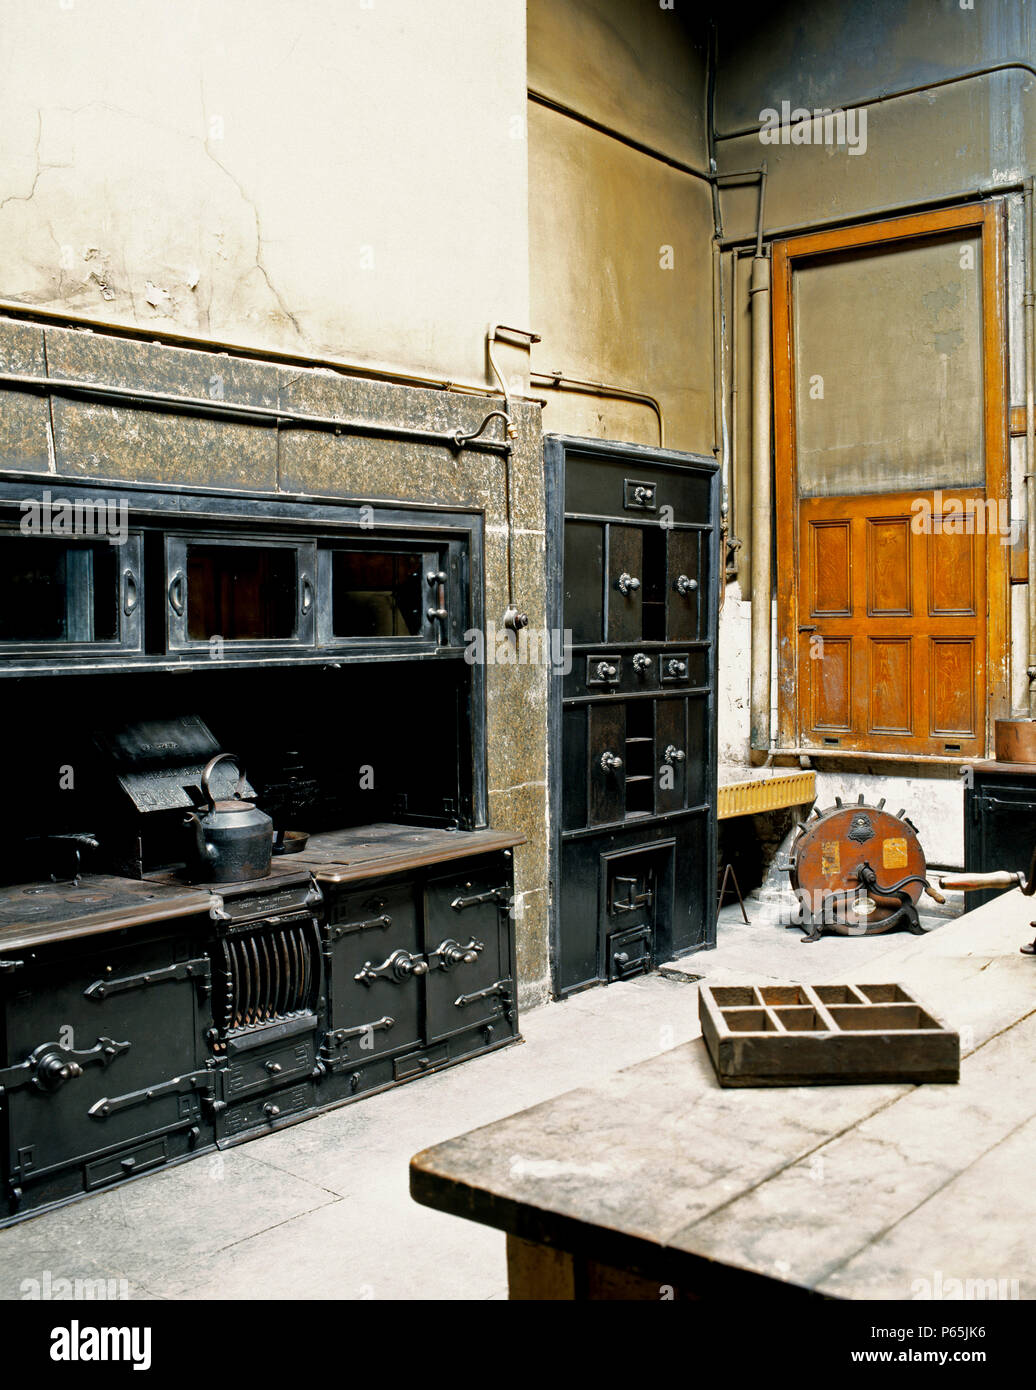 Old kitchen in an English mansion in renovation process. Stock Photo